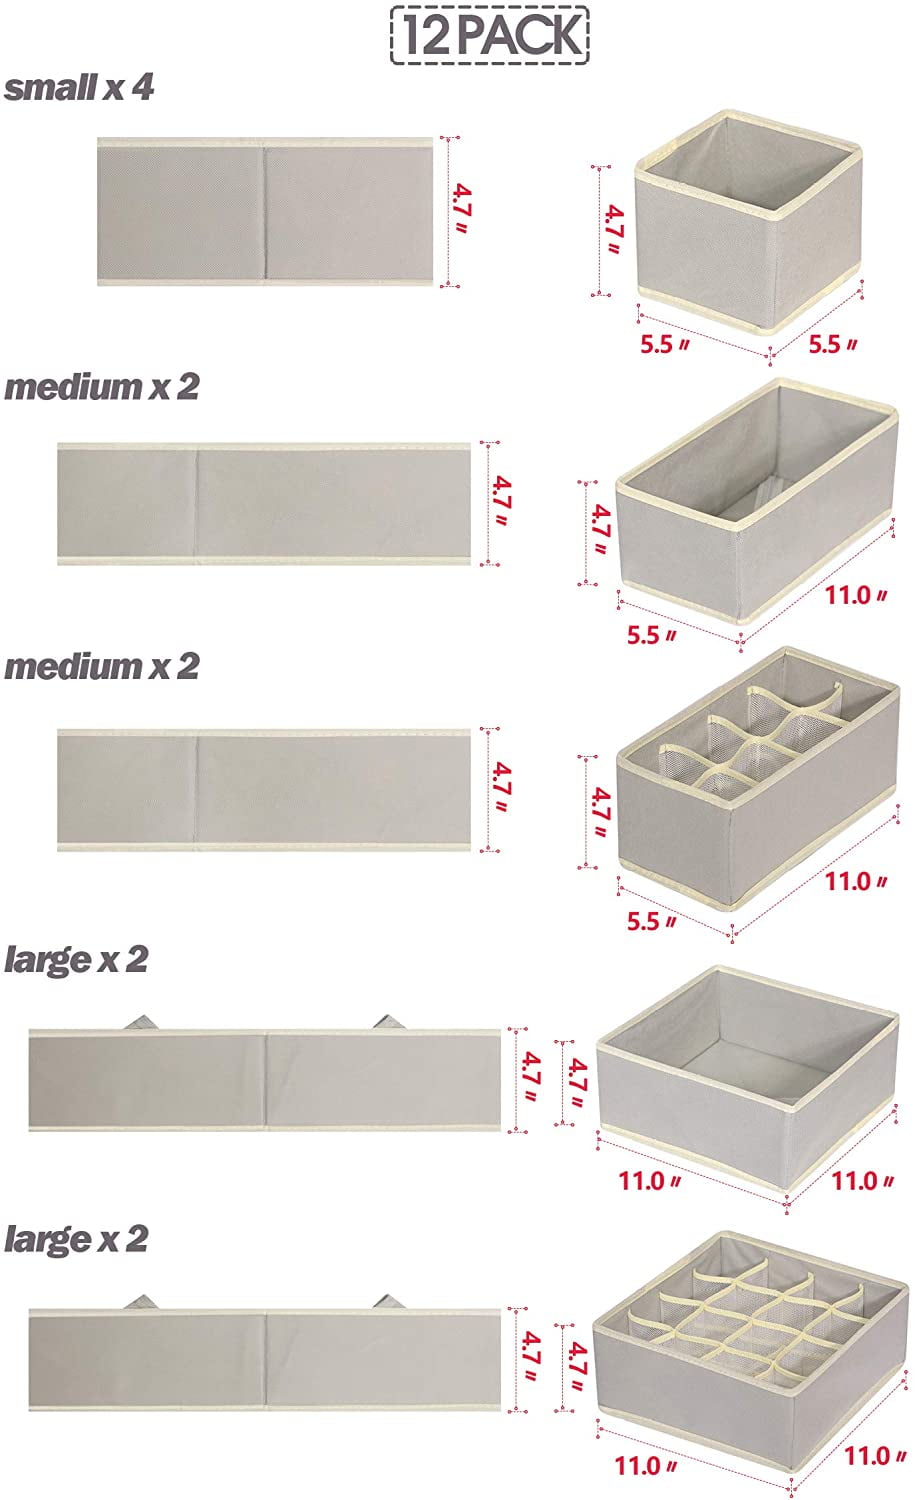 DIOMMELL 12 Pack Foldable Cloth Storage Box Closet Dresser Drawer Organizer Fabric Baskets Bins Containers Divider for Baby Clothes Underwear Bras Socks Lingerie Clothing Beige 444 